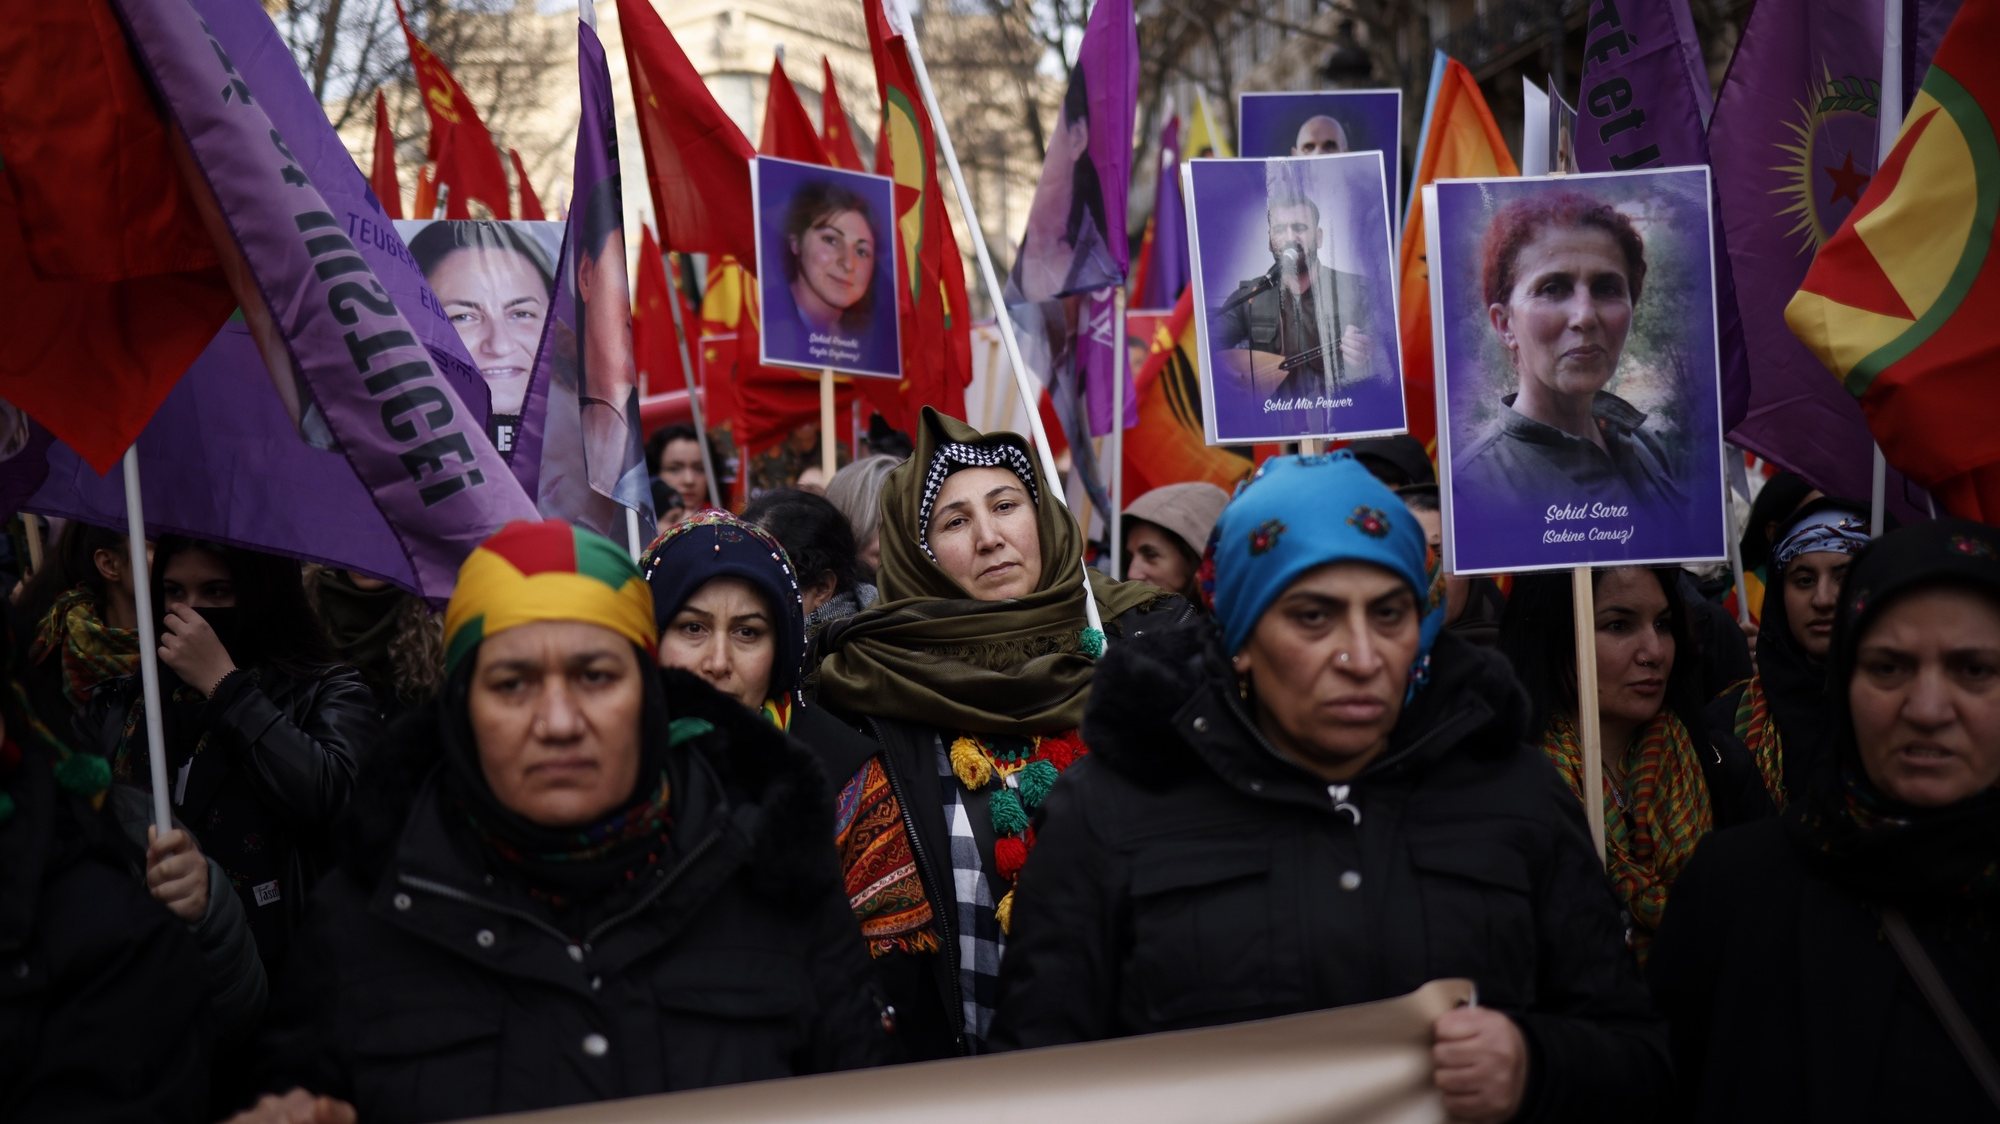 epa10394170 Members of the Kurdish community take part in a demonstration marking the 10th anniversary of the killing of three Kurdistan Workers Party (PKK) members in Paris, France, 07 January 2023. Three Kurdish women, including the founding member of the PKK, were shot dead at a community center in Paris on 10 January 2013. The commemoration comes a few days after a gunman opened fire outside a Kurdish cultural center in central Paris on 23 December 2022, killing three people.  EPA/YOAN VALAT